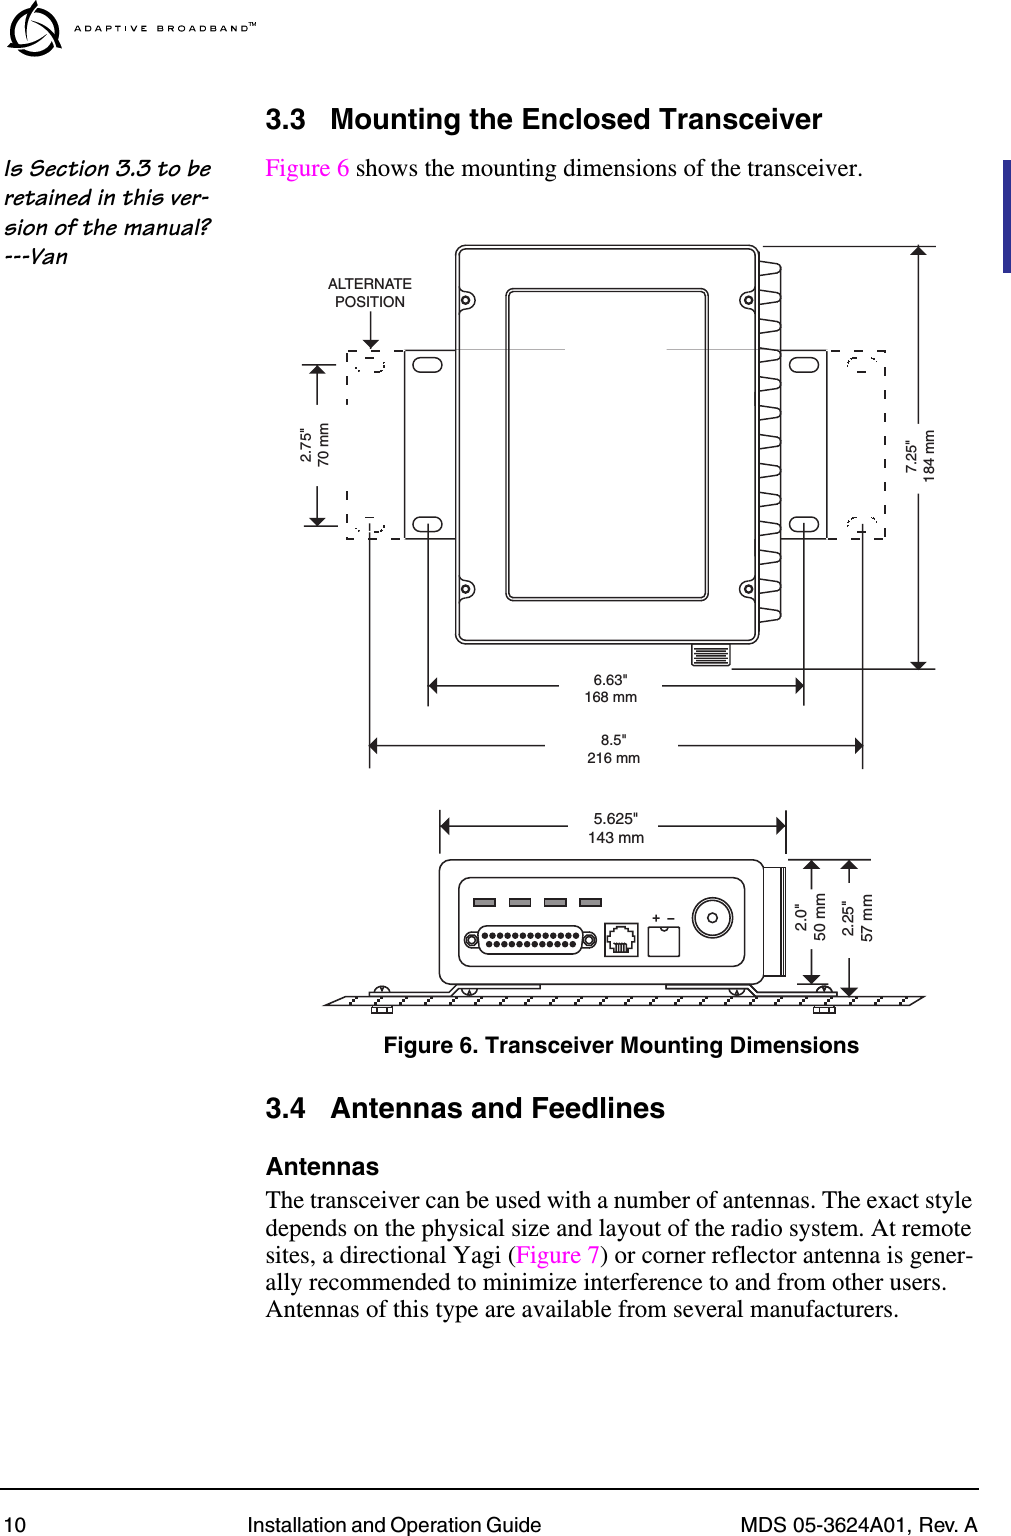 10 Installation and Operation Guide  MDS 05-3624A01, Rev. A3.3 Mounting the Enclosed TransceiverIs Section 3.3 to be retained in this ver-sion of the manual? ---VanFigure 6 shows the mounting dimensions of the transceiver.Invisible place holderFigure 6. Transceiver Mounting Dimensions3.4 Antennas and FeedlinesAntennasThe transceiver can be used with a number of antennas. The exact style depends on the physical size and layout of the radio system. At remote sites, a directional Yagi (Figure 7) or corner reflector antenna is gener-ally recommended to minimize interference to and from other users. Antennas of this type are available from several manufacturers.8.5&quot;216 mm1.75&quot;4.44 CM6.63&quot;168 mm2.75&quot;70 mm7.25&quot;184 mmALTERNATEPOSITION5.625&quot;143 mm2.25&quot;57 mm2.0&quot;50 mm